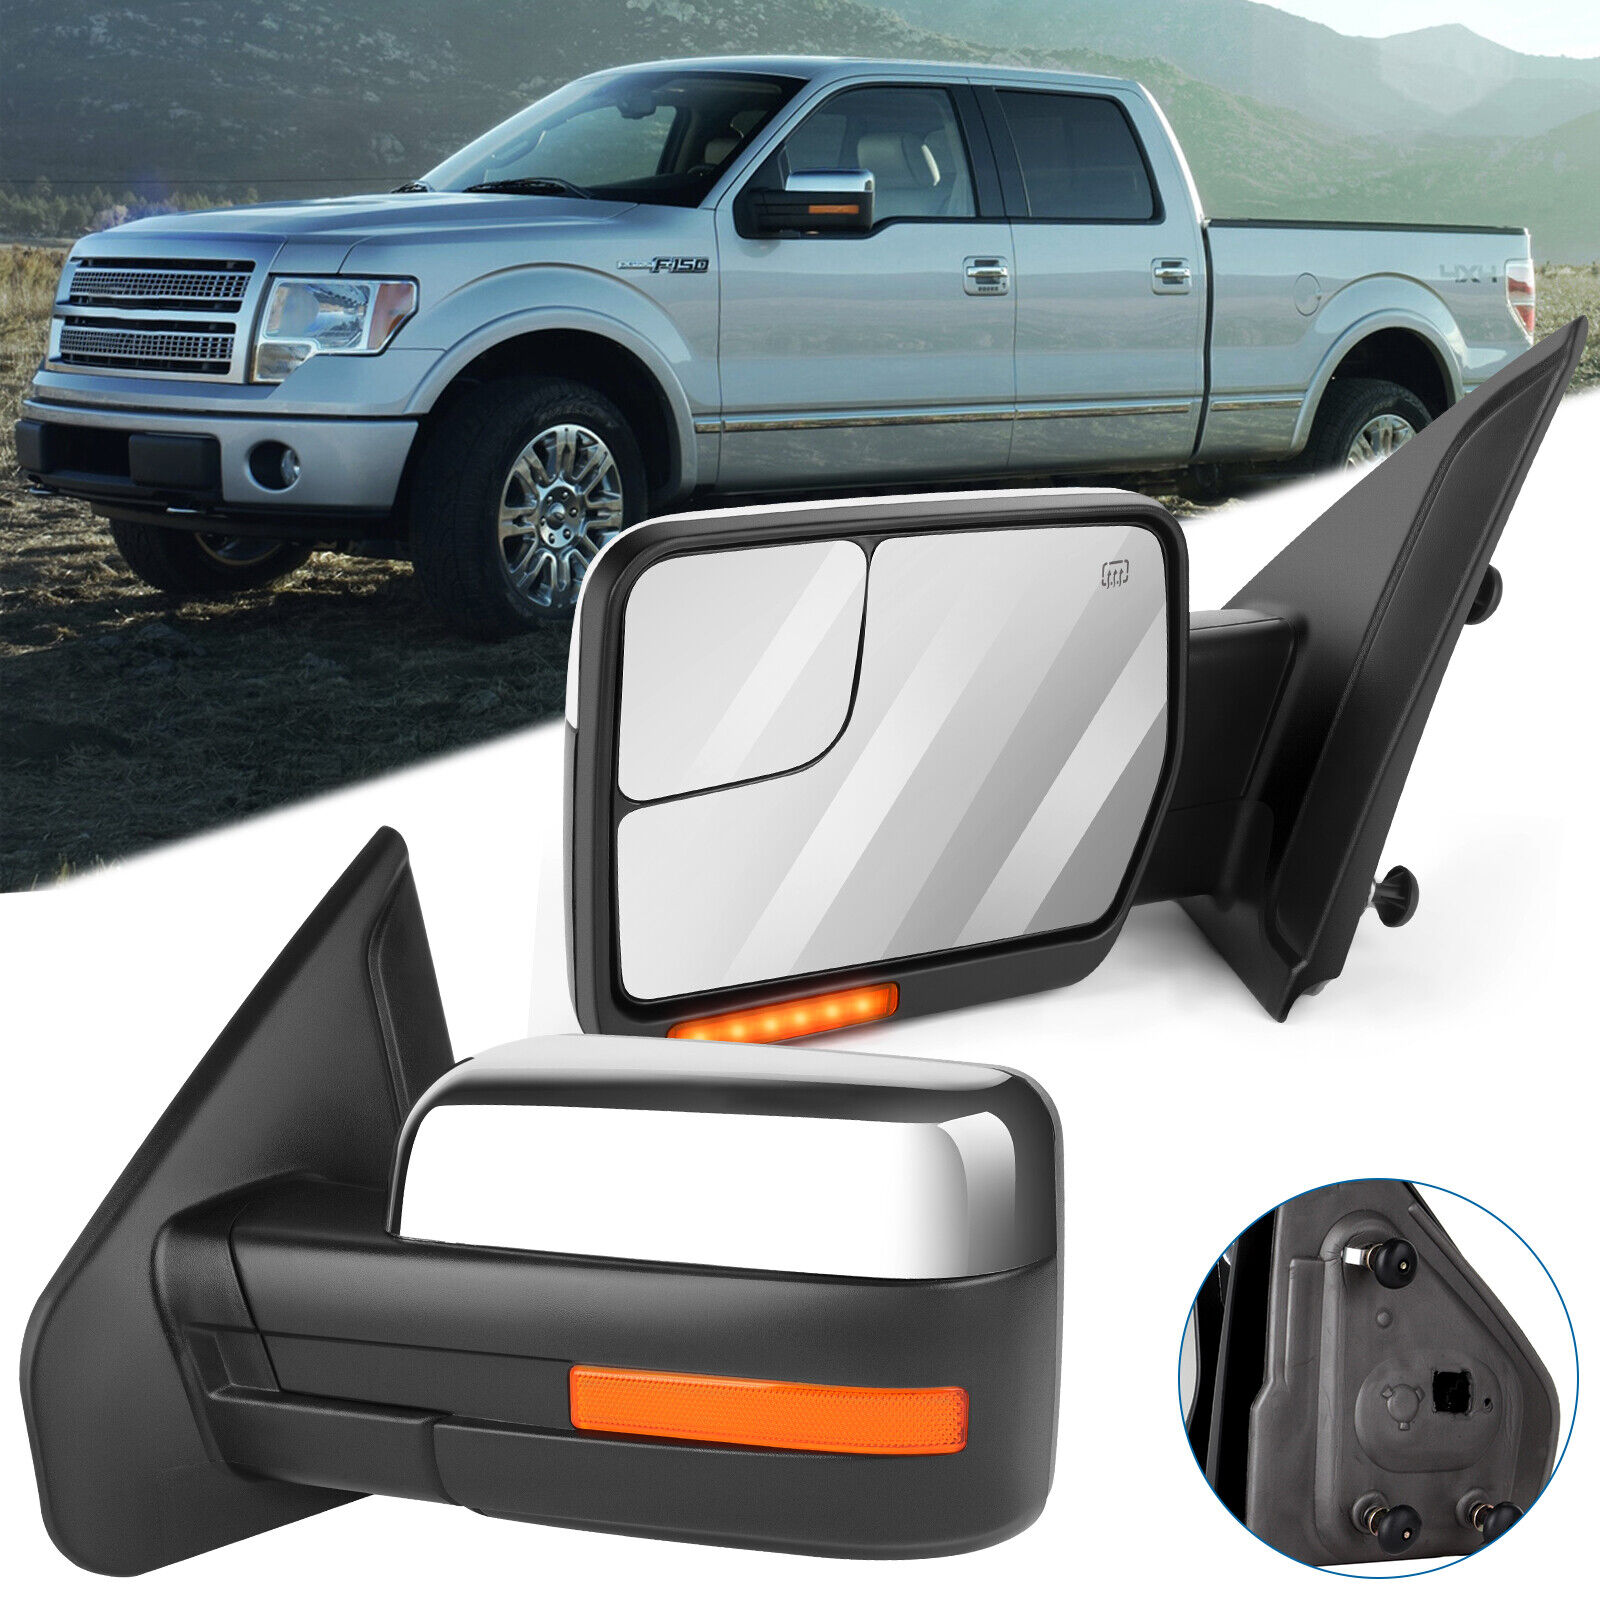 ✅ Chrome Tow Mirrors Power Heated Signals For 2004-2014 F-150 Truck LH+RH